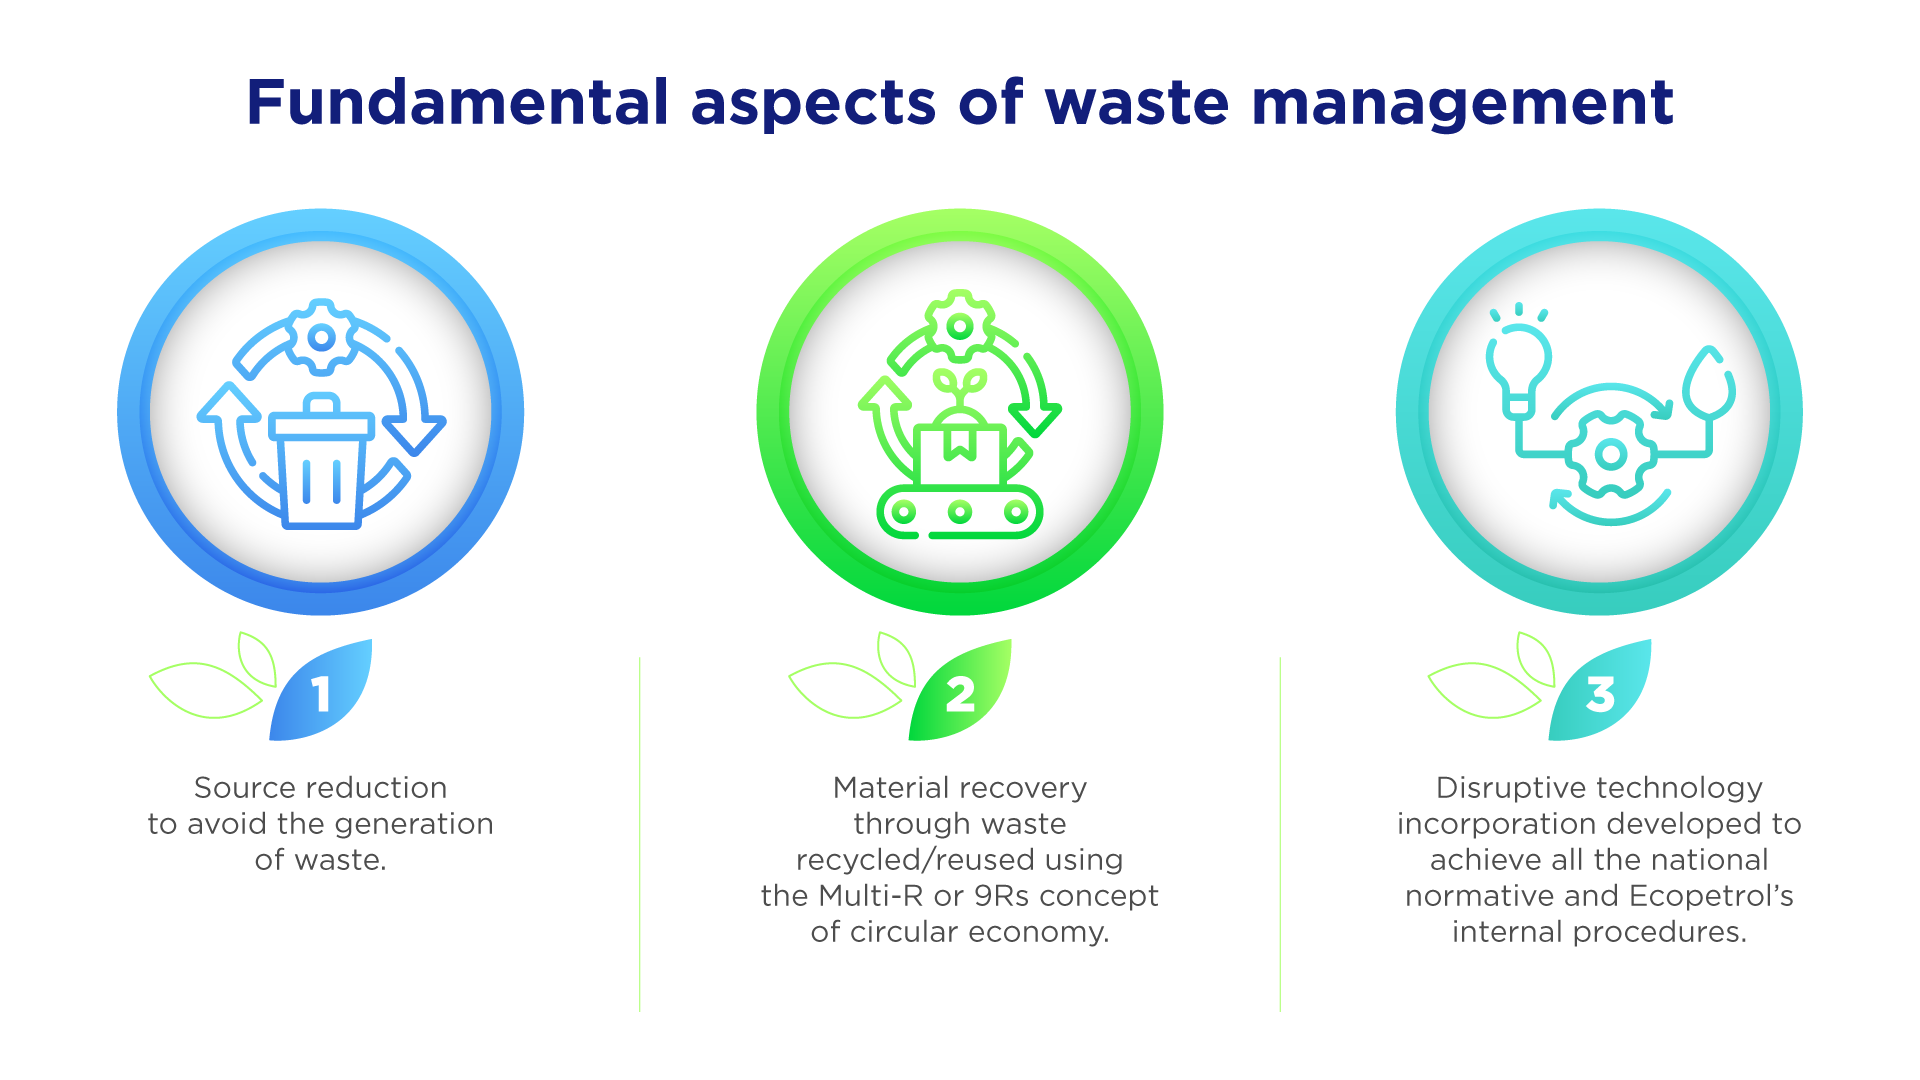 Fundamental aspects of waste management